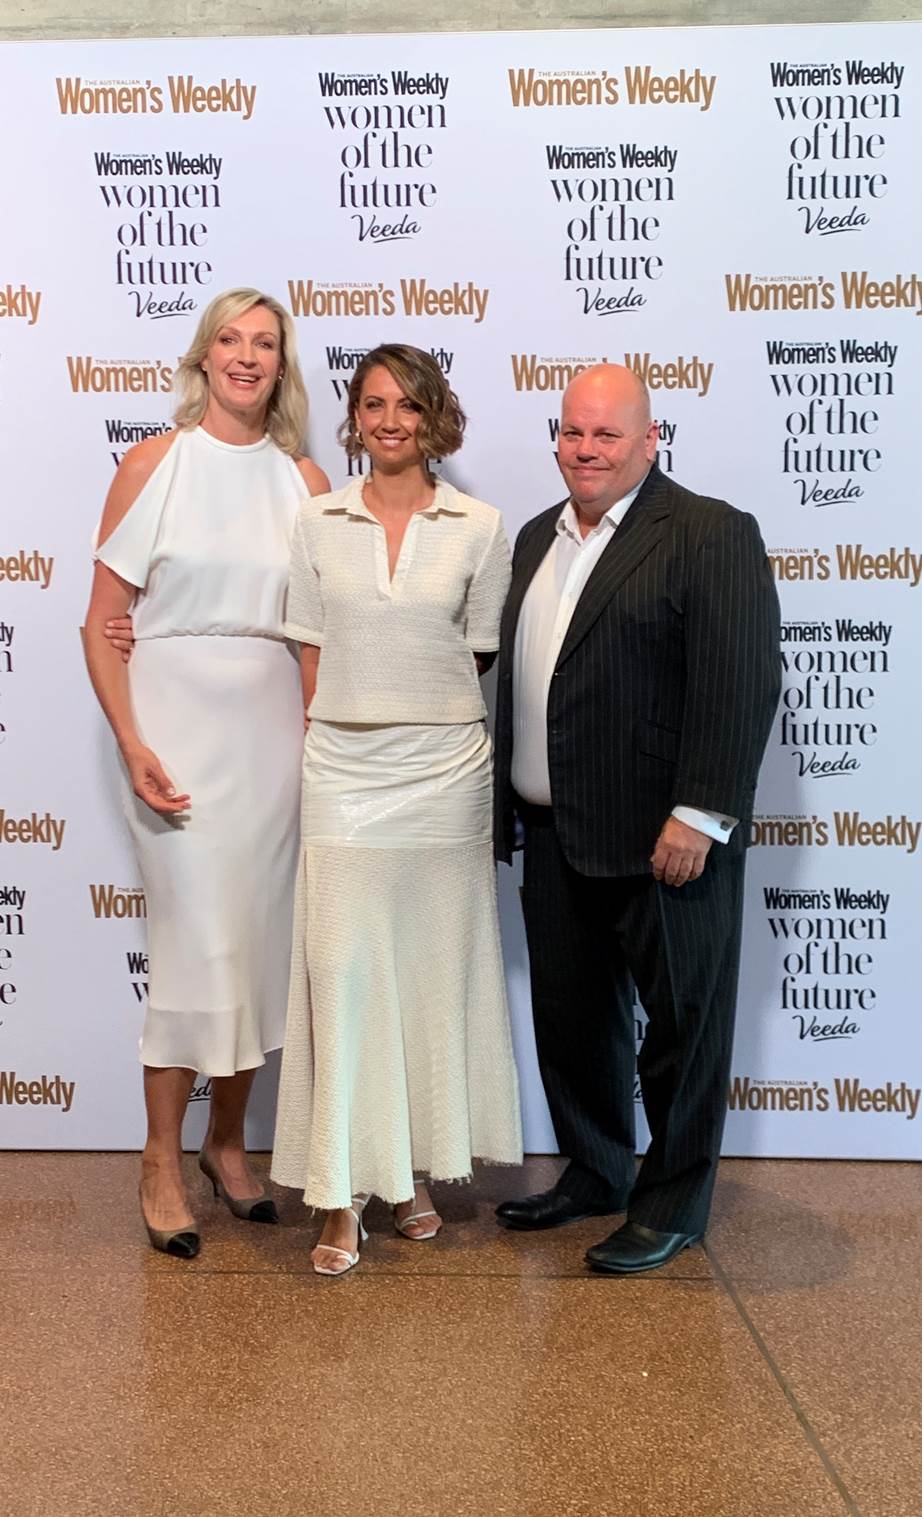 Women's Weekly Editor-In-Chief Nicole Byers, the event MC and TV icon Brooke Boney and Veeda CEO Adrian Forsyth share a red carpet snap.